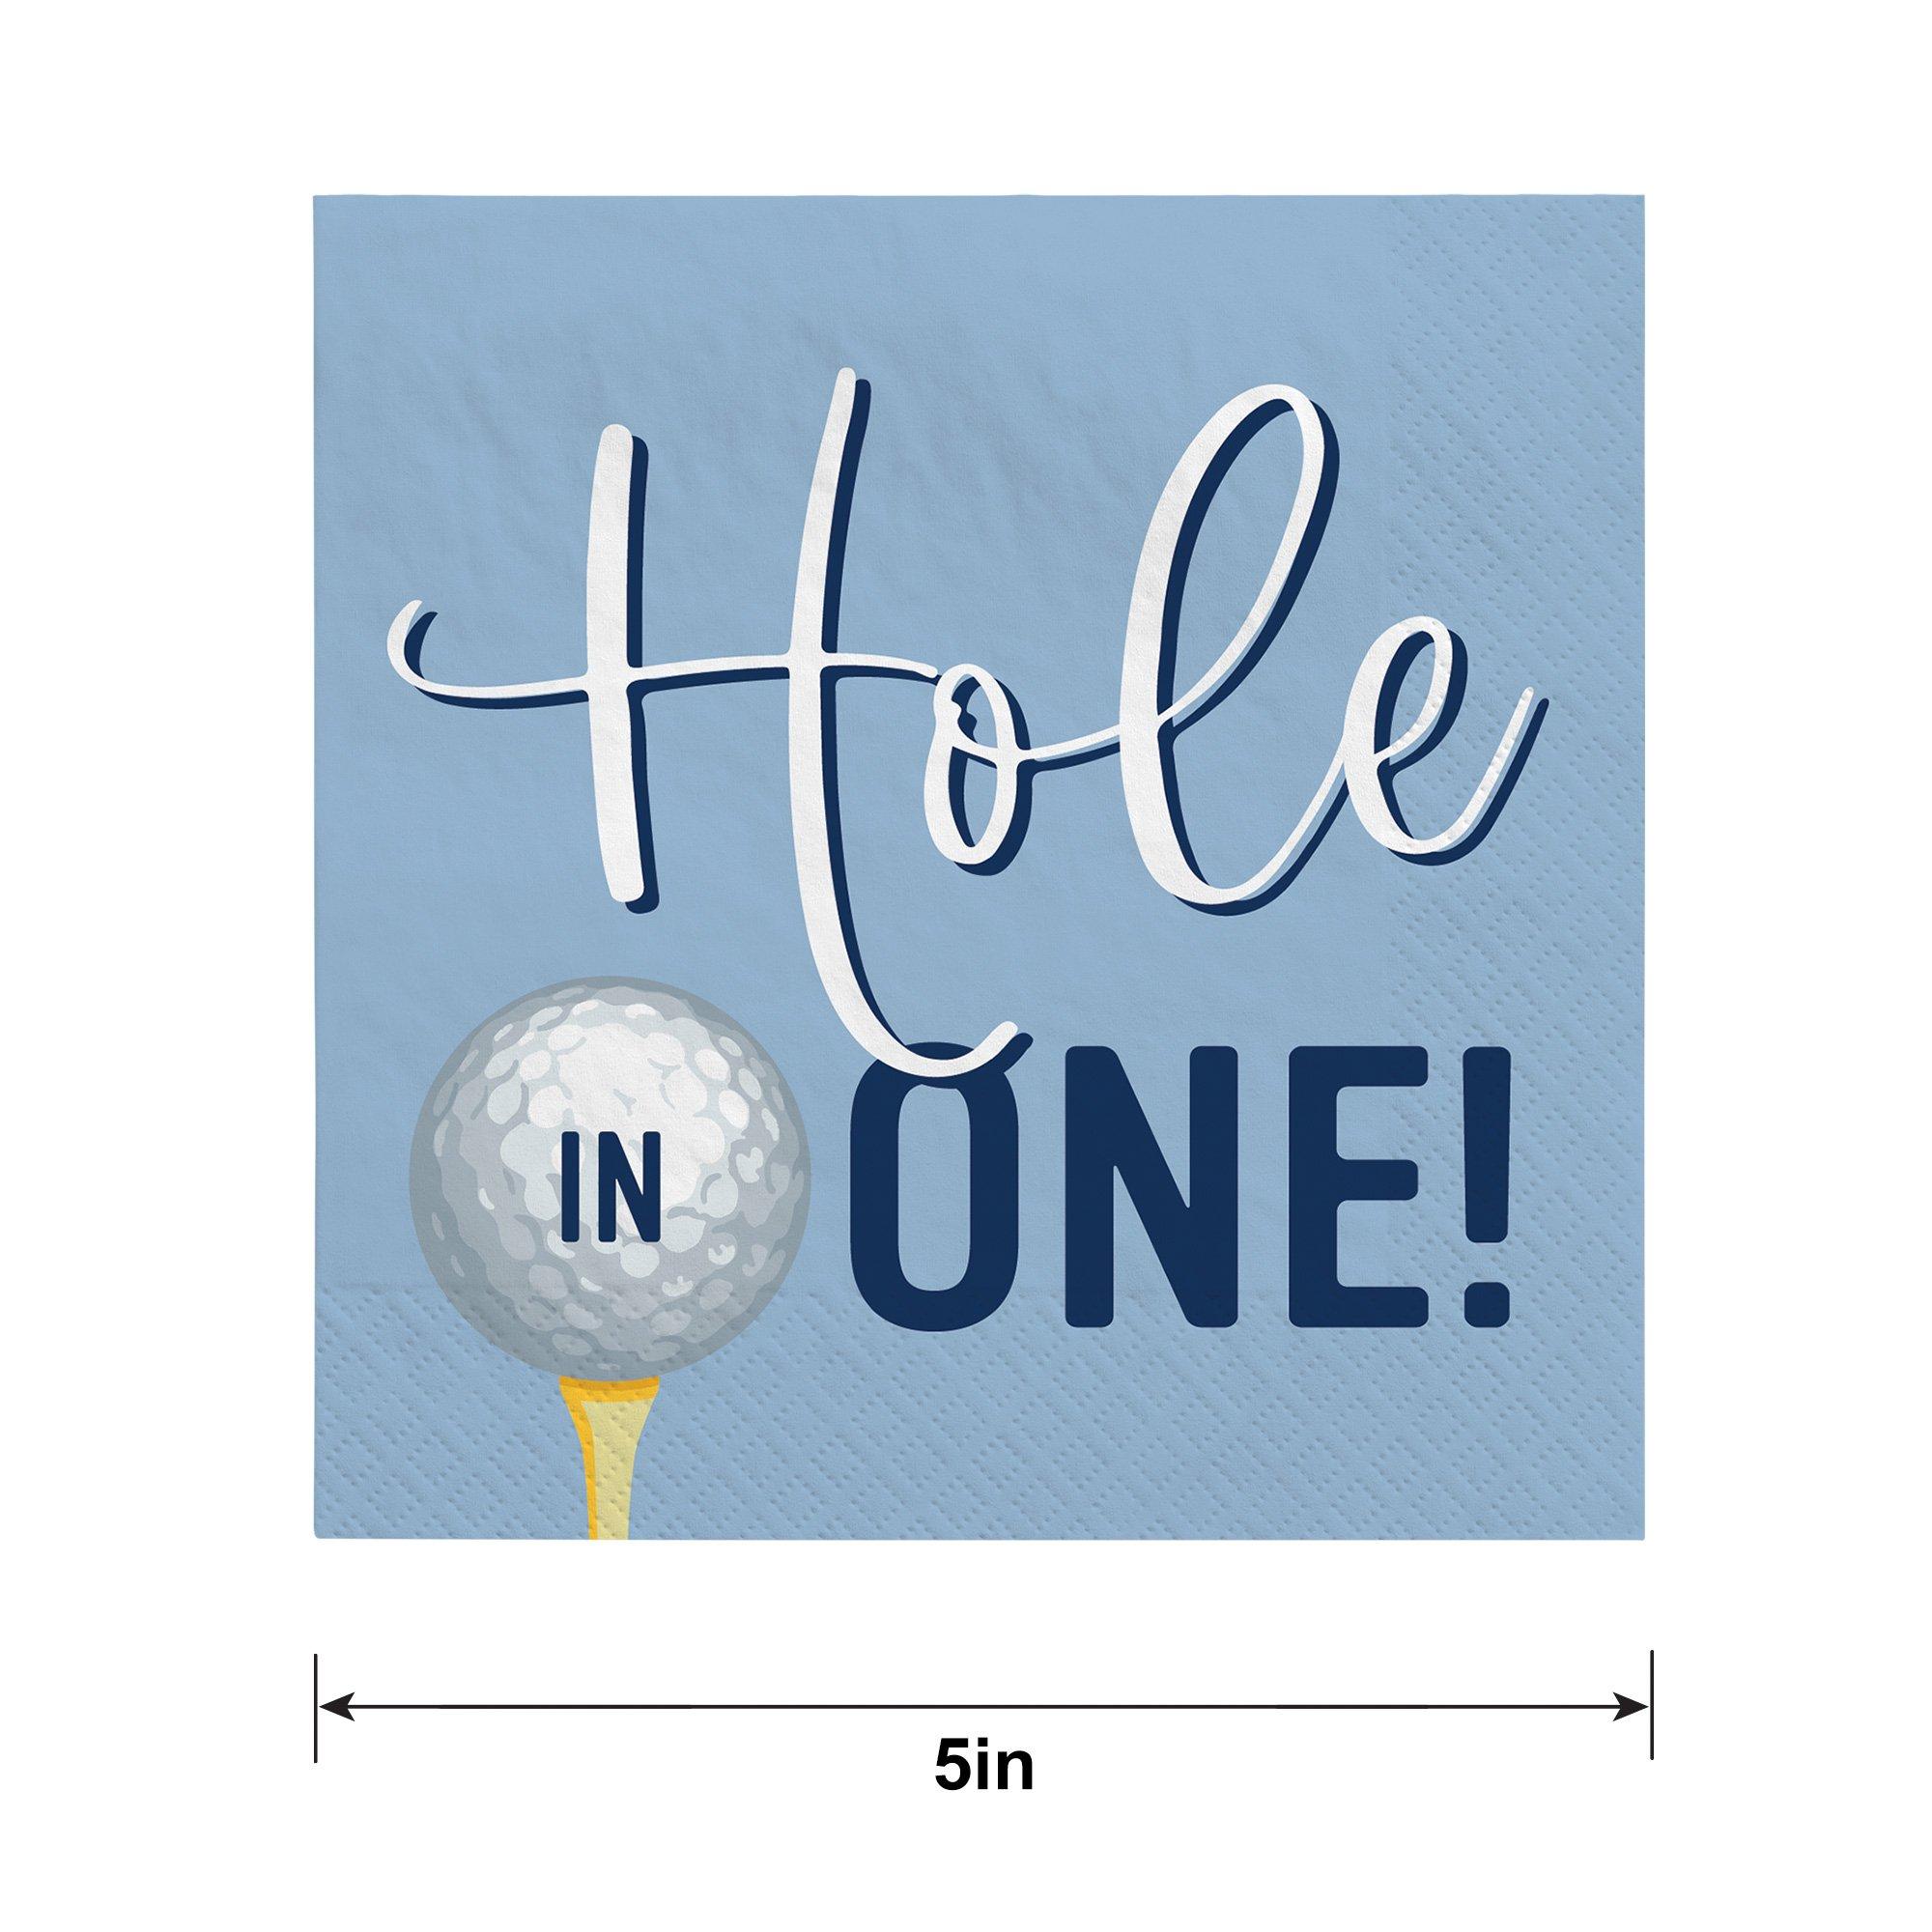 Hole in One Golf Paper Beverage Napkins, 5in, 40ct